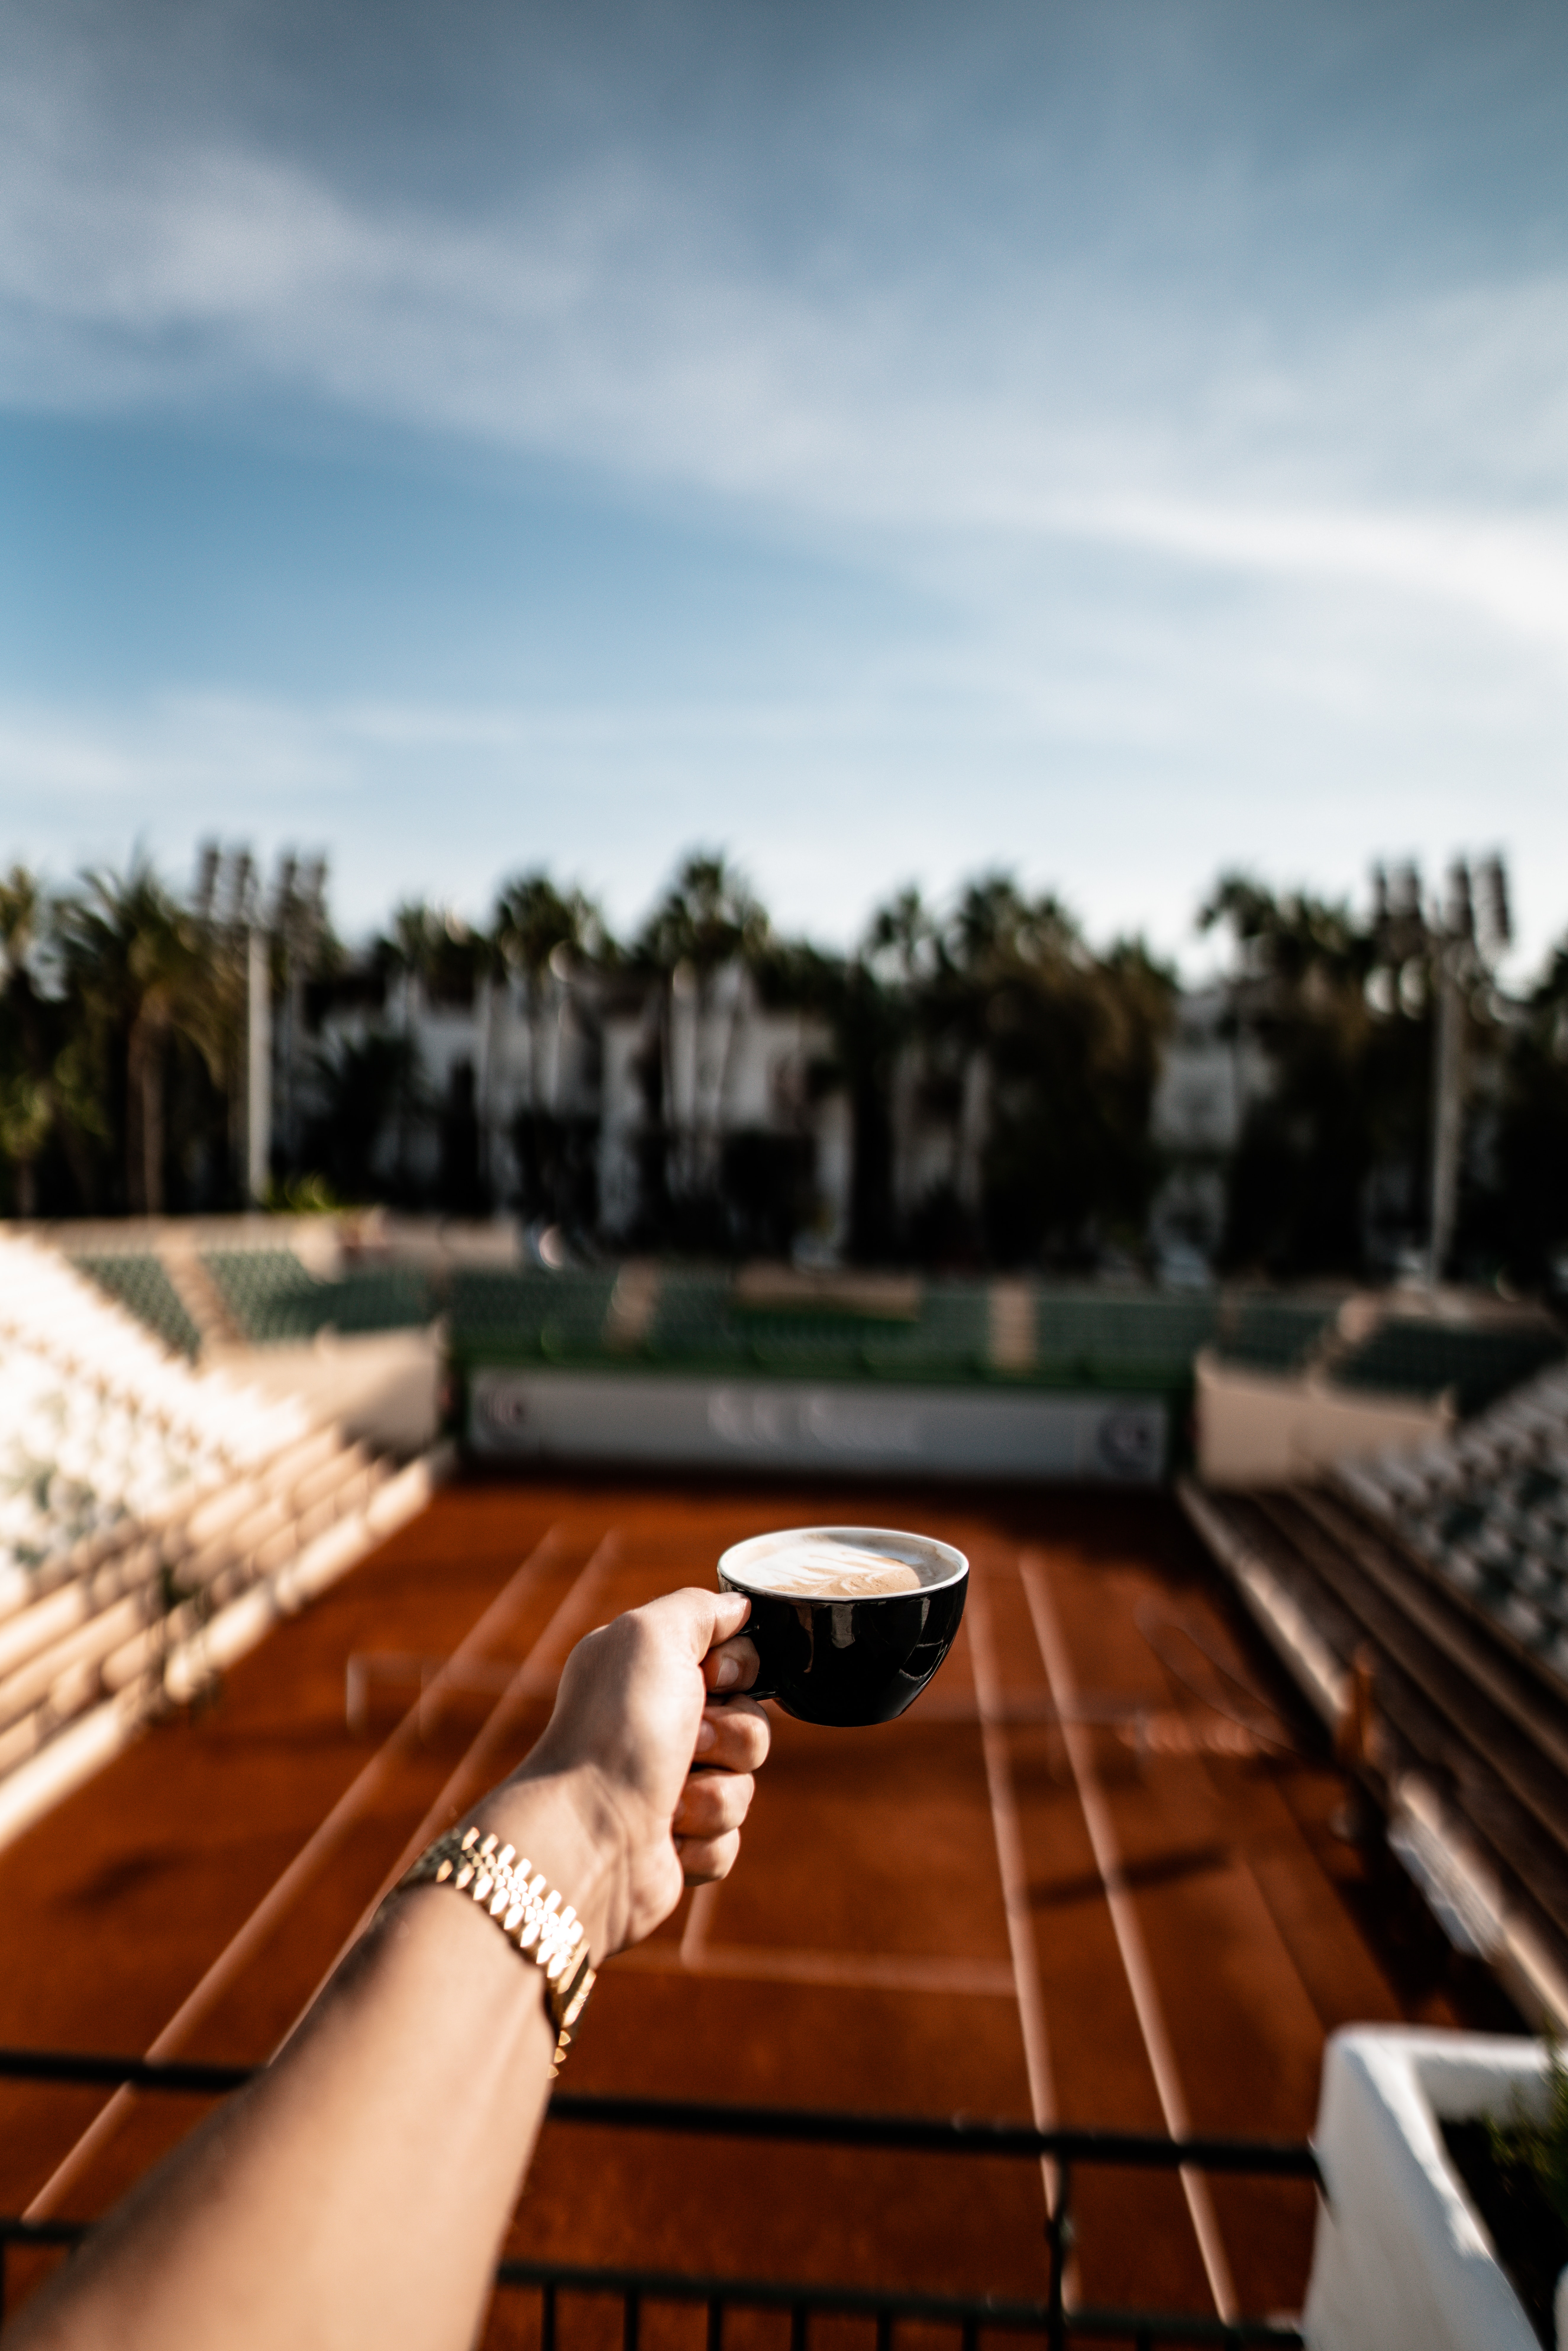 miscellanea, coffee, hand, miscellaneous, cup, tennis court